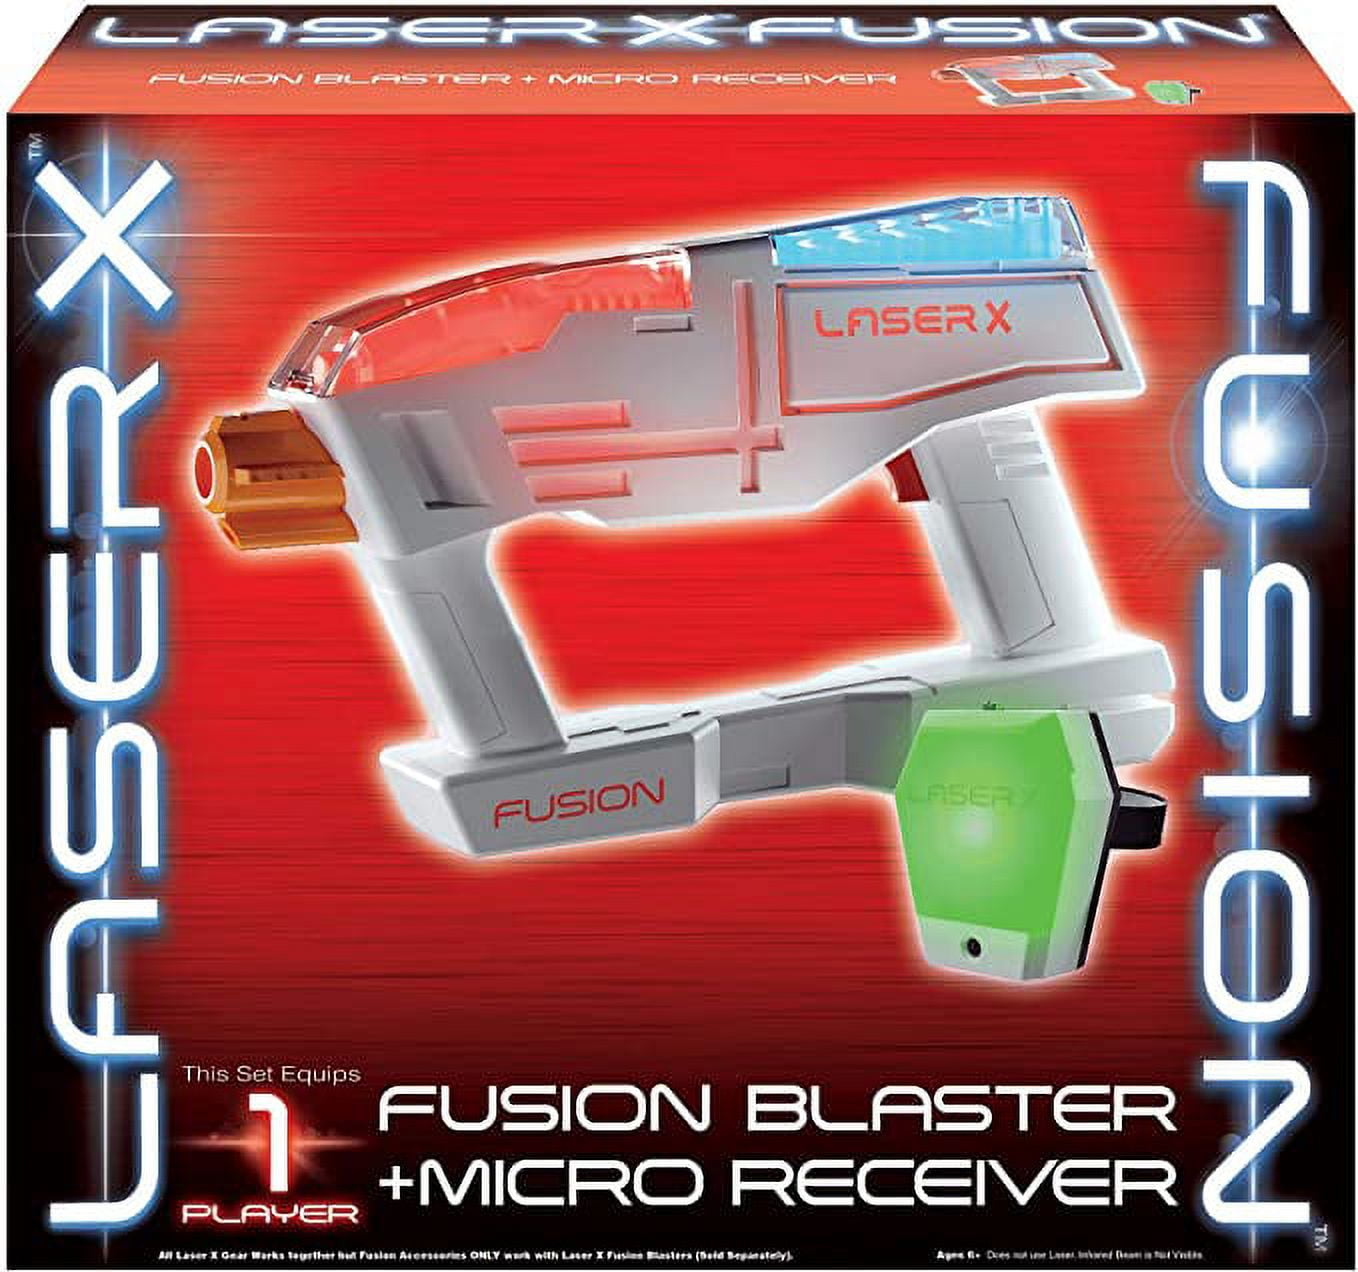 Laser X 2 Pack Fusion Blaster + Micro Receiver, Blaster Toy - One Player  Each Pck - 30 Feet x 20 Wide Range - Fun for at Home or Outdoor  Entertainment